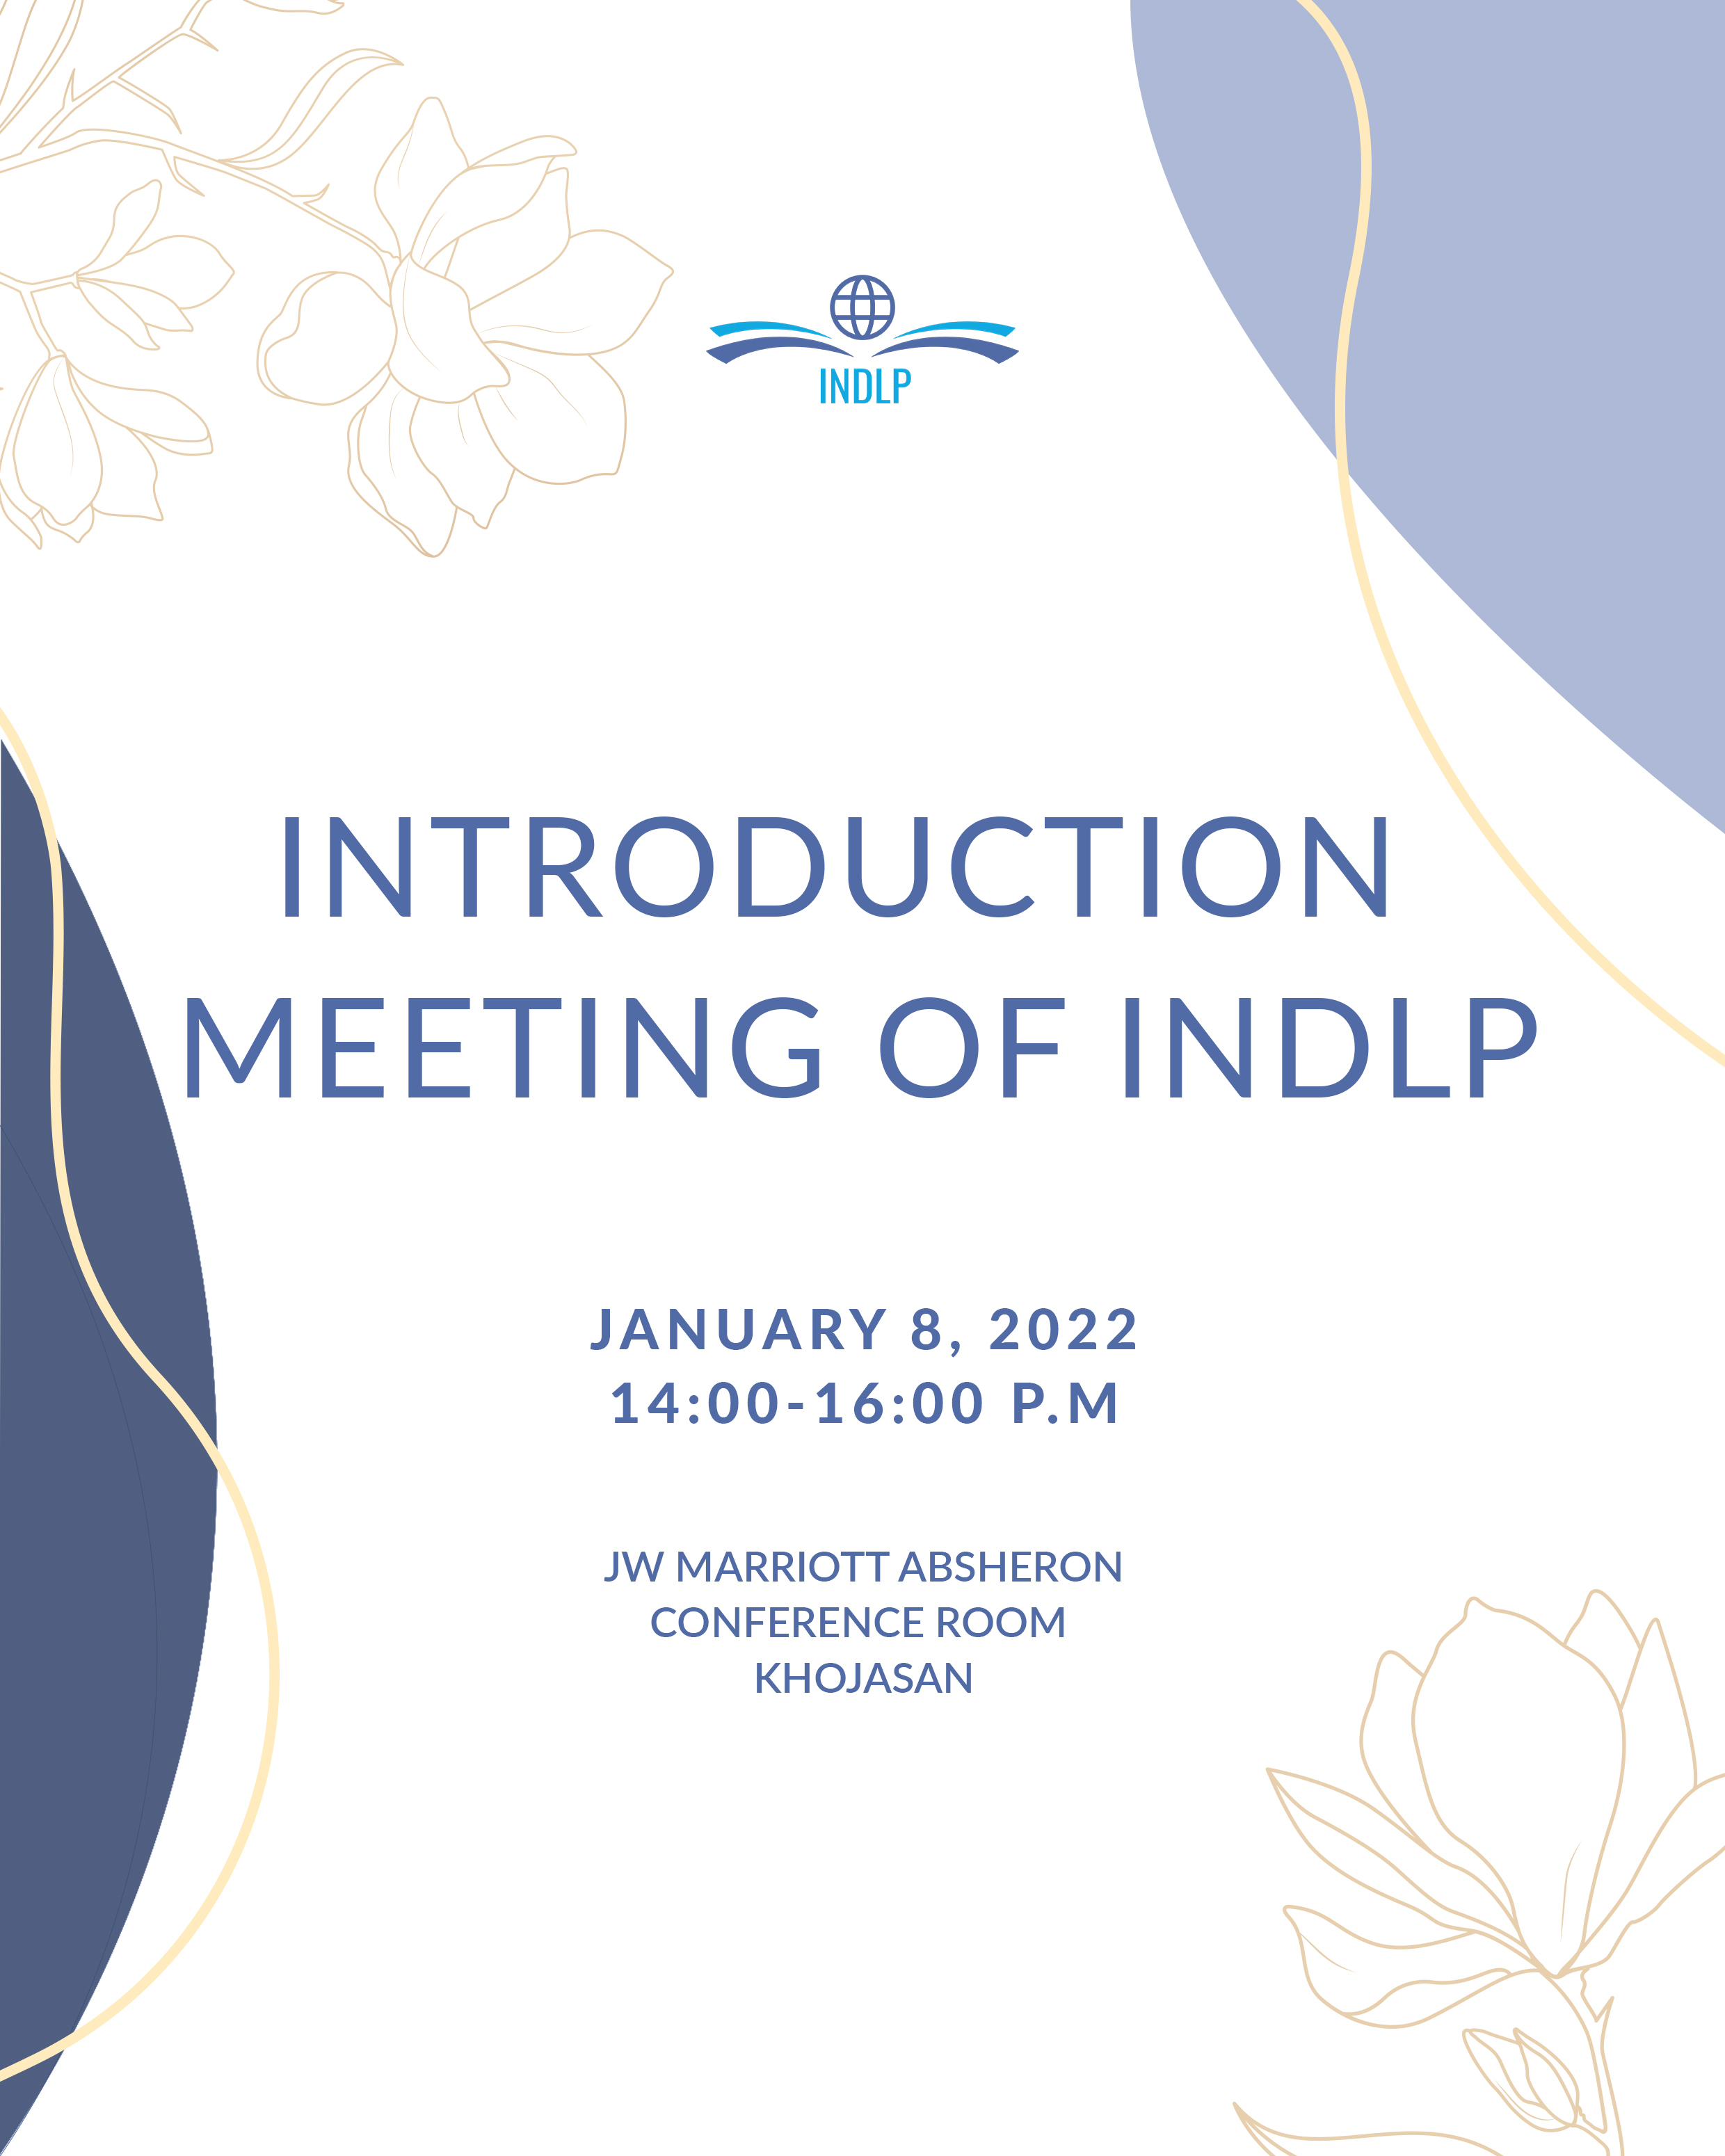 Introduction to INDLP